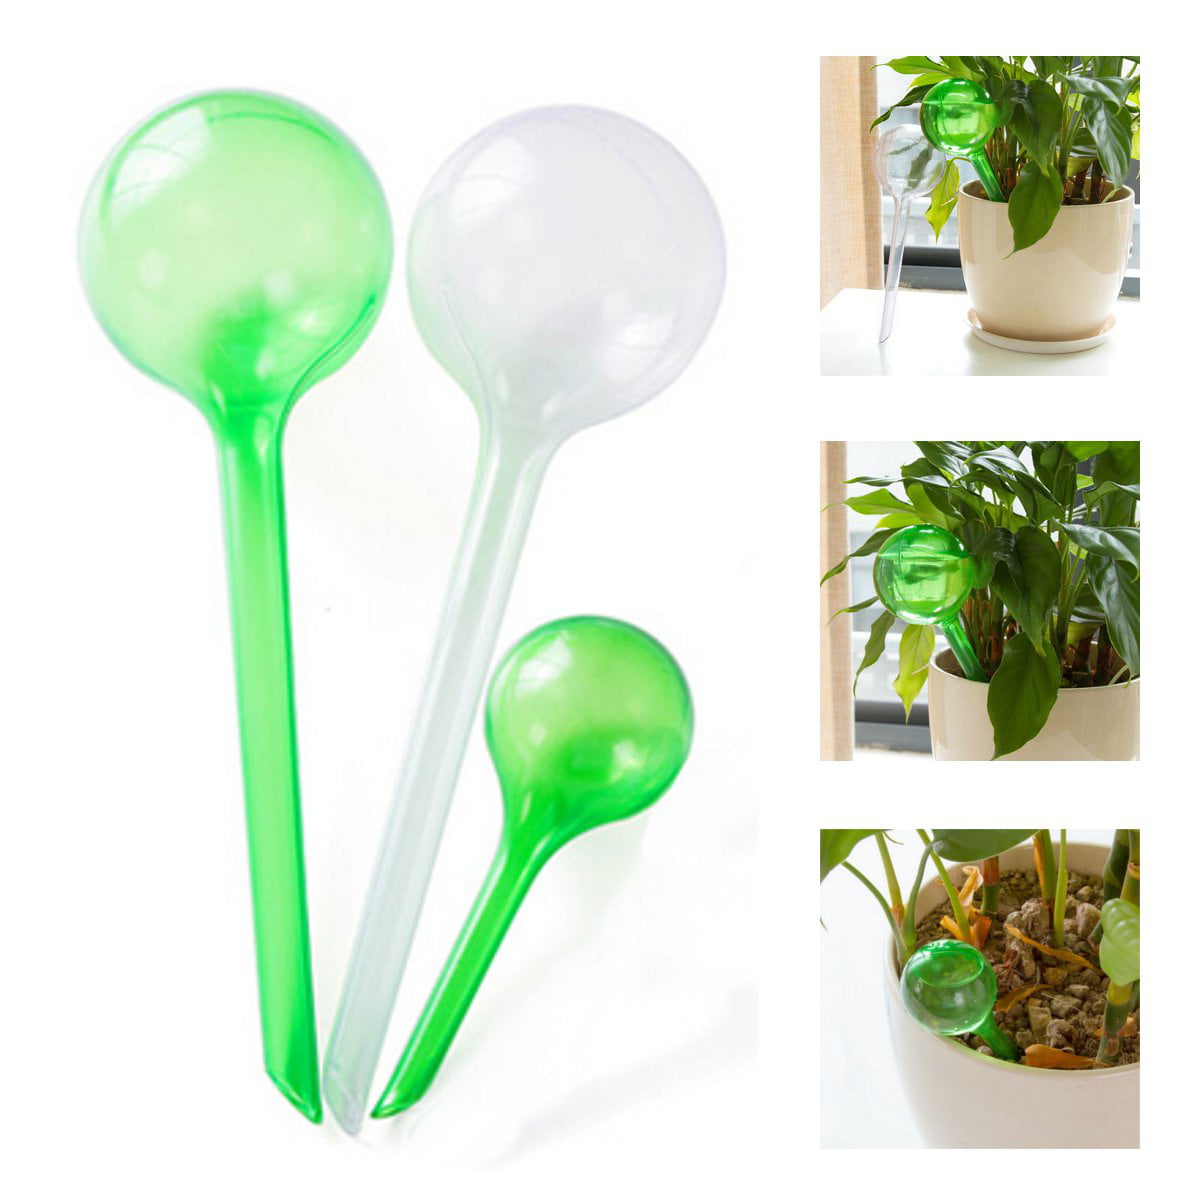 Automatic Watering Device Houseplant Plant Pot Bulb Globe Garden House Tool